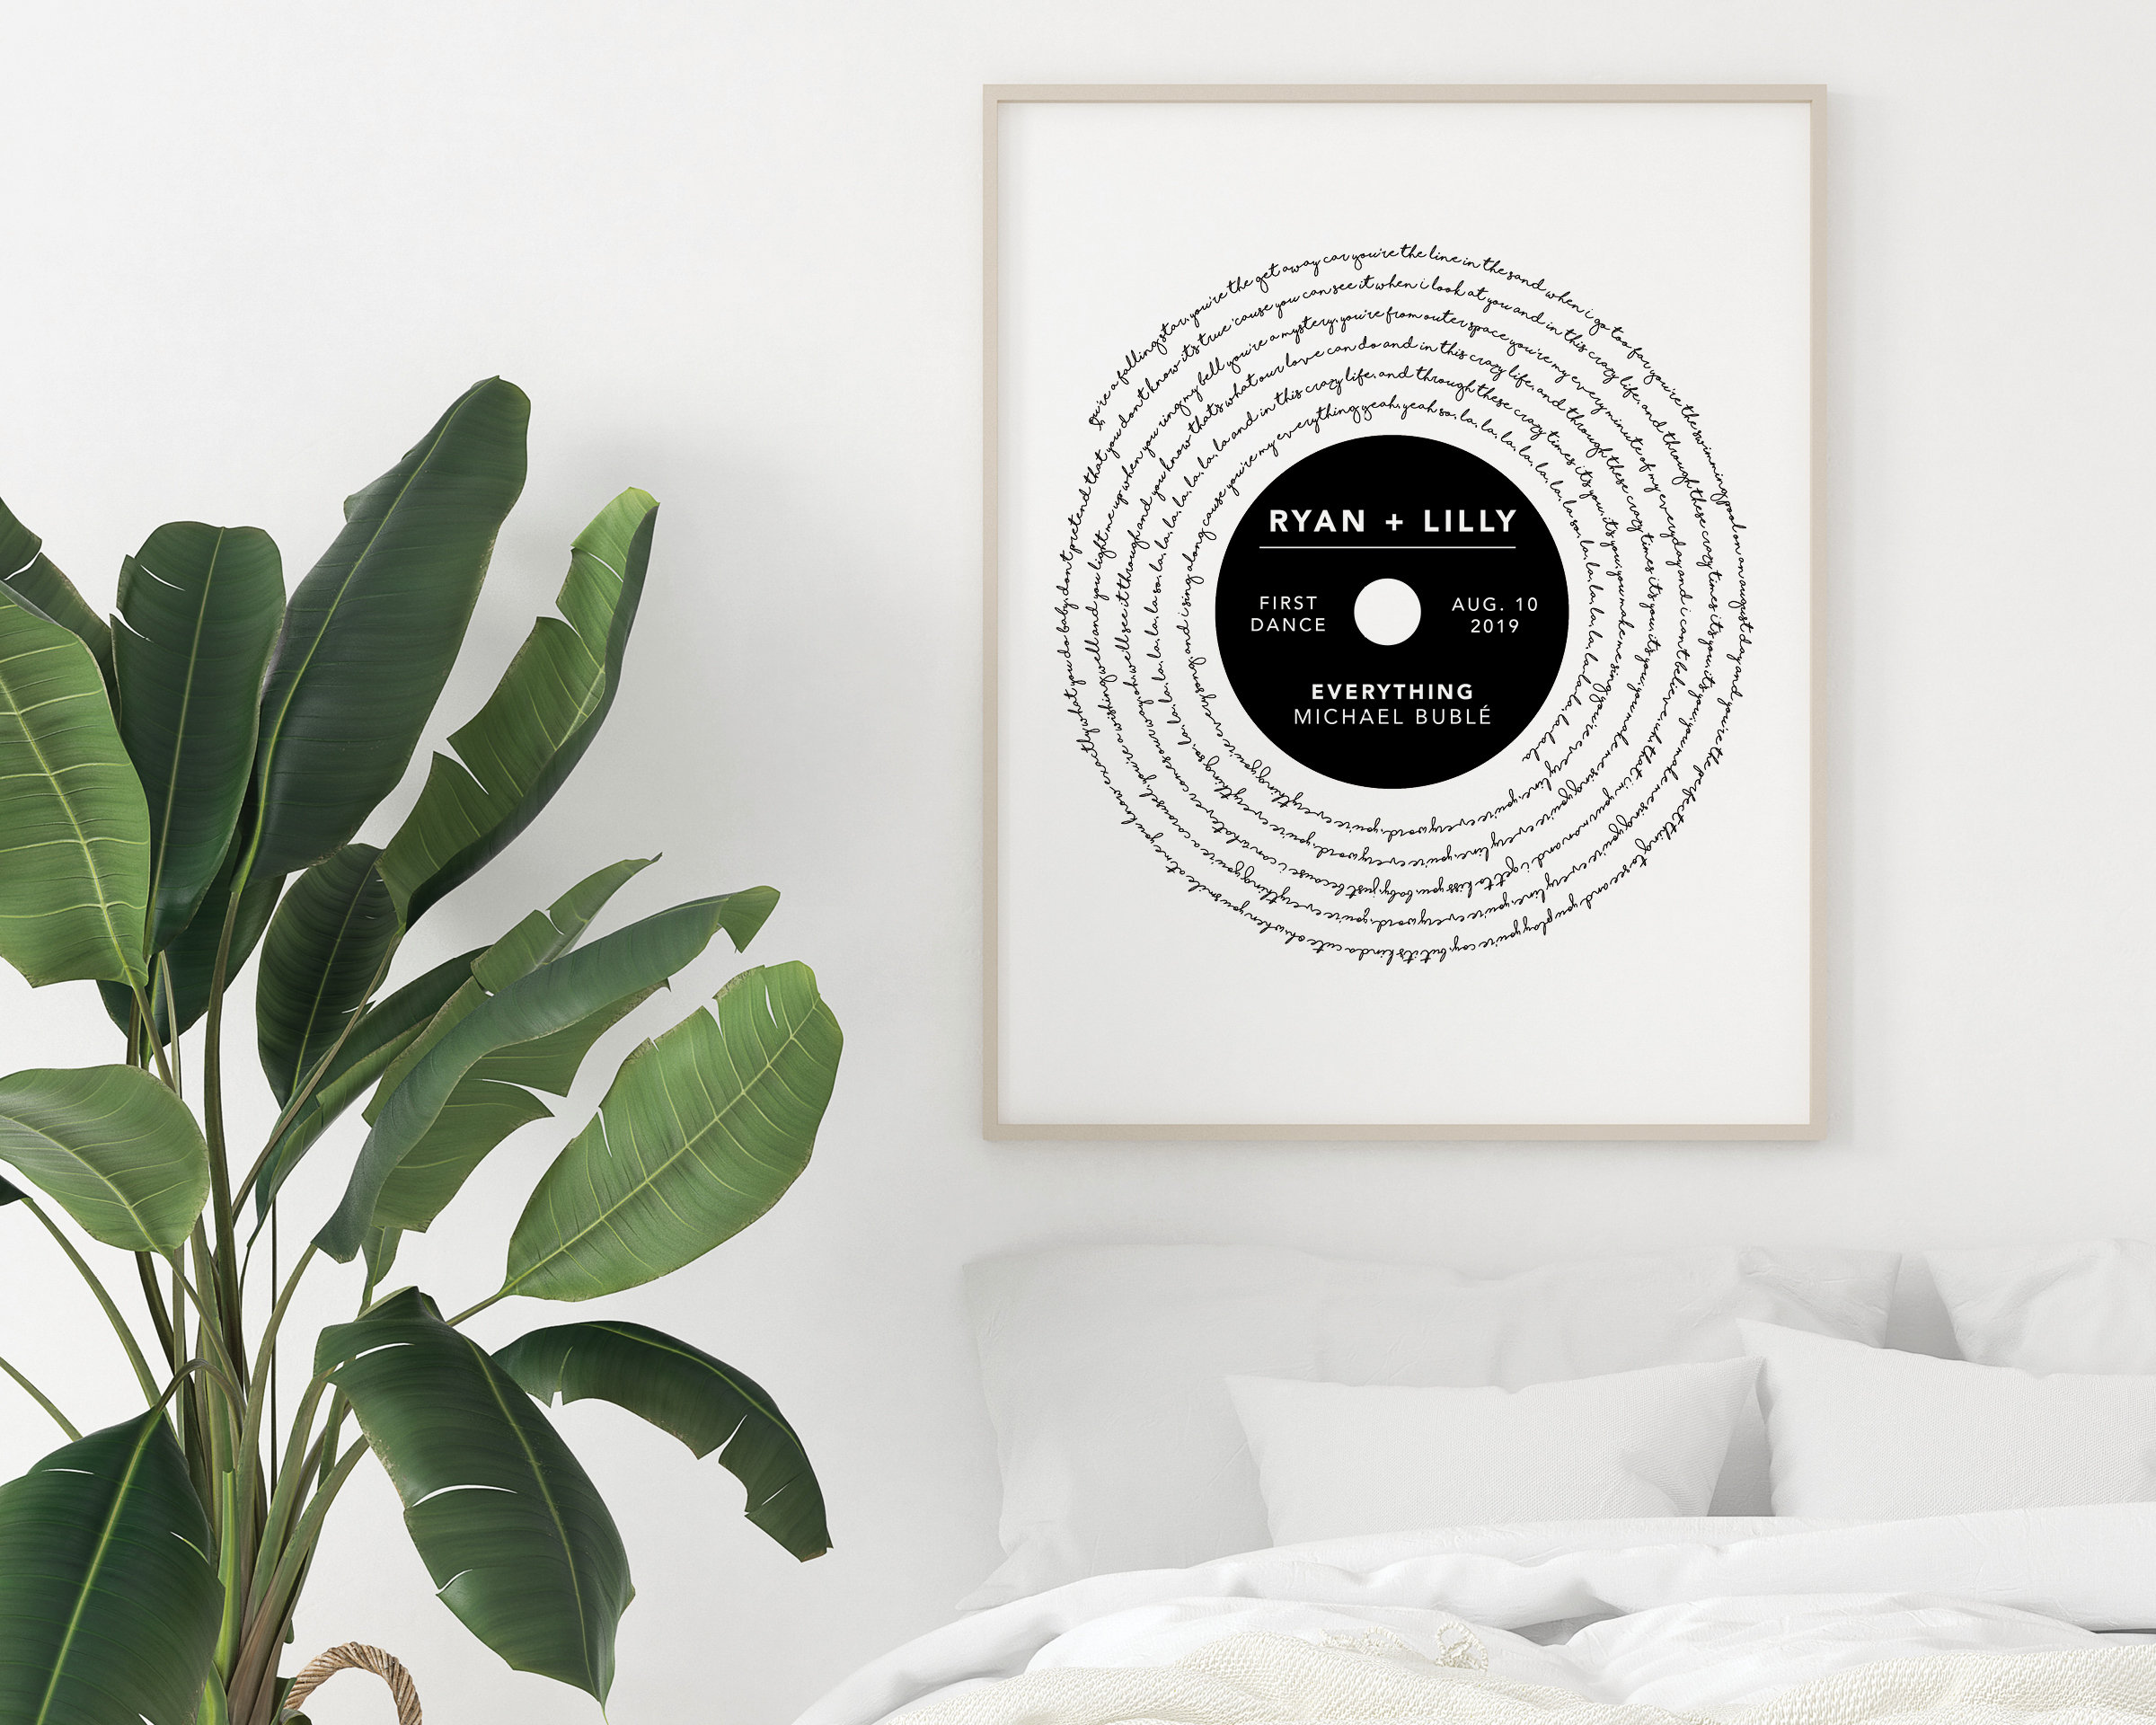 H-DEWALL Personalized Acrylic Song Lyrics Gifts For Couples Create Photo  Your Own Name Date Anniversary Customized Vynil Record Photo In